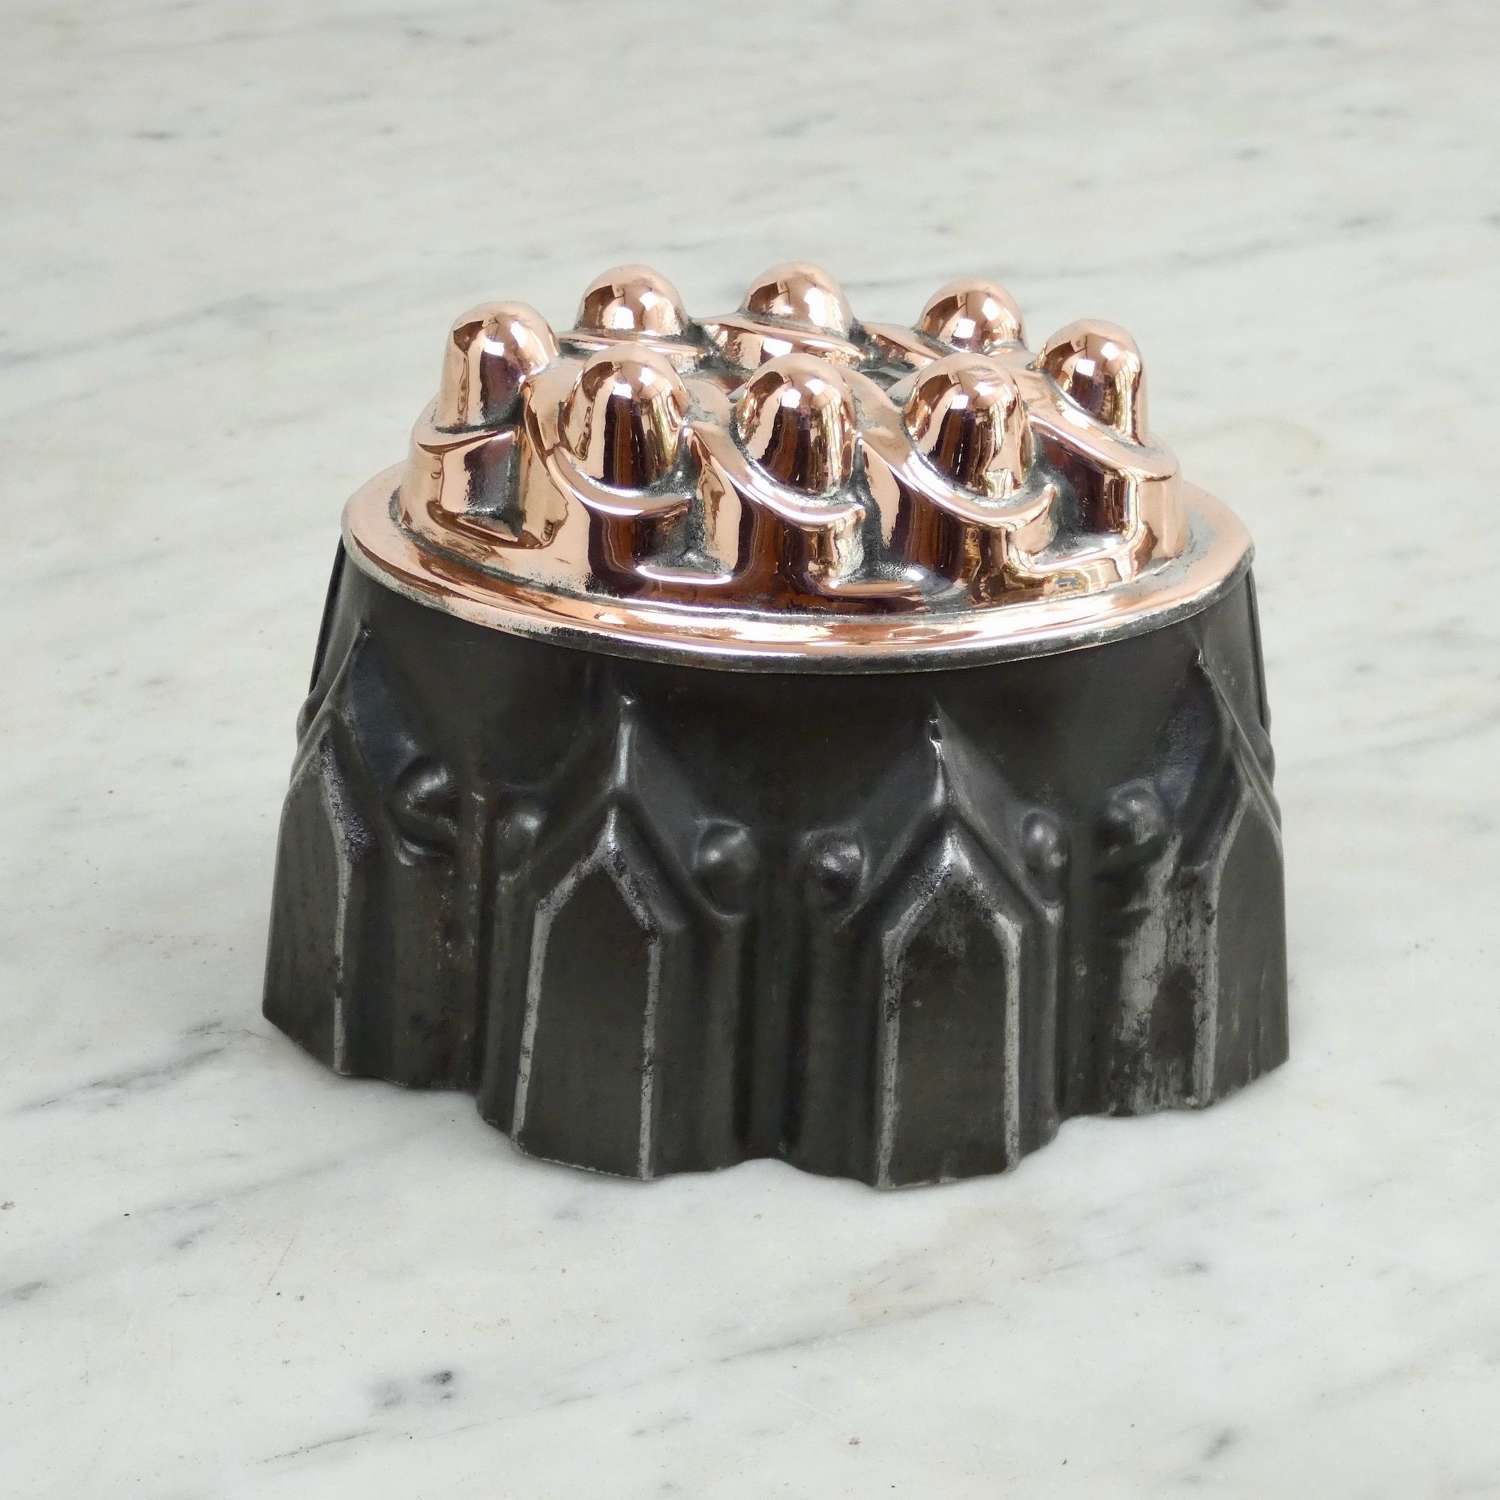 Geometric, copper and tin mould